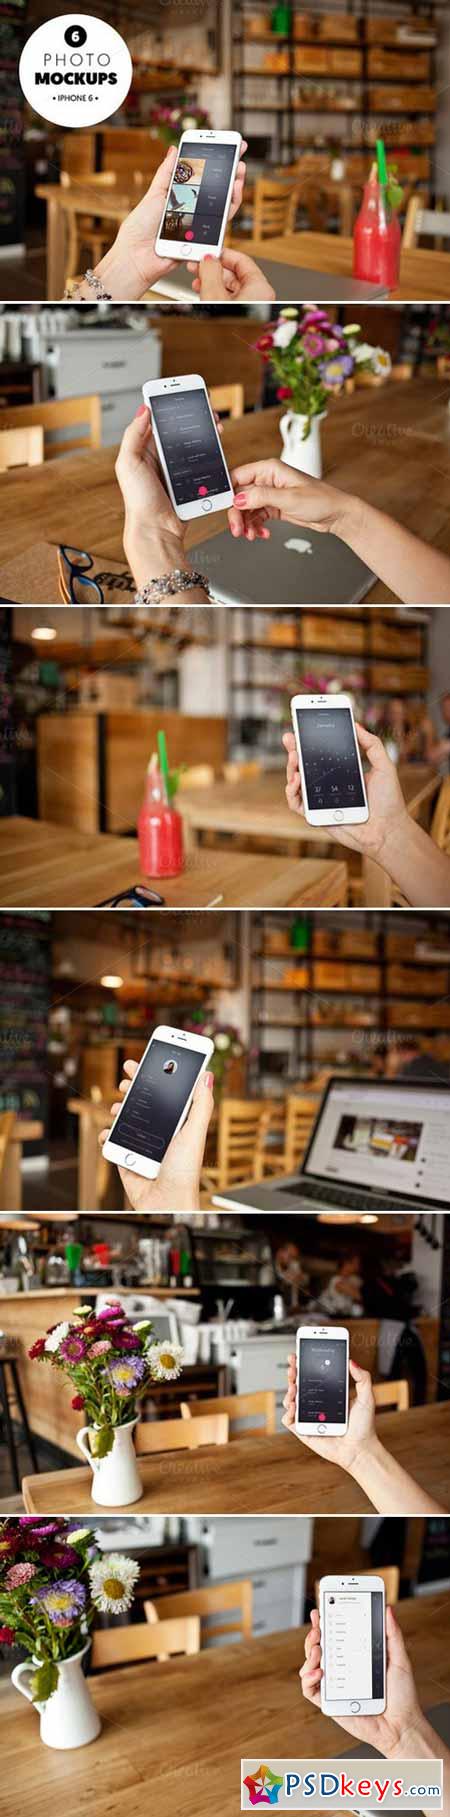 iphone 6 in the cafe-6 photo mockups 442591